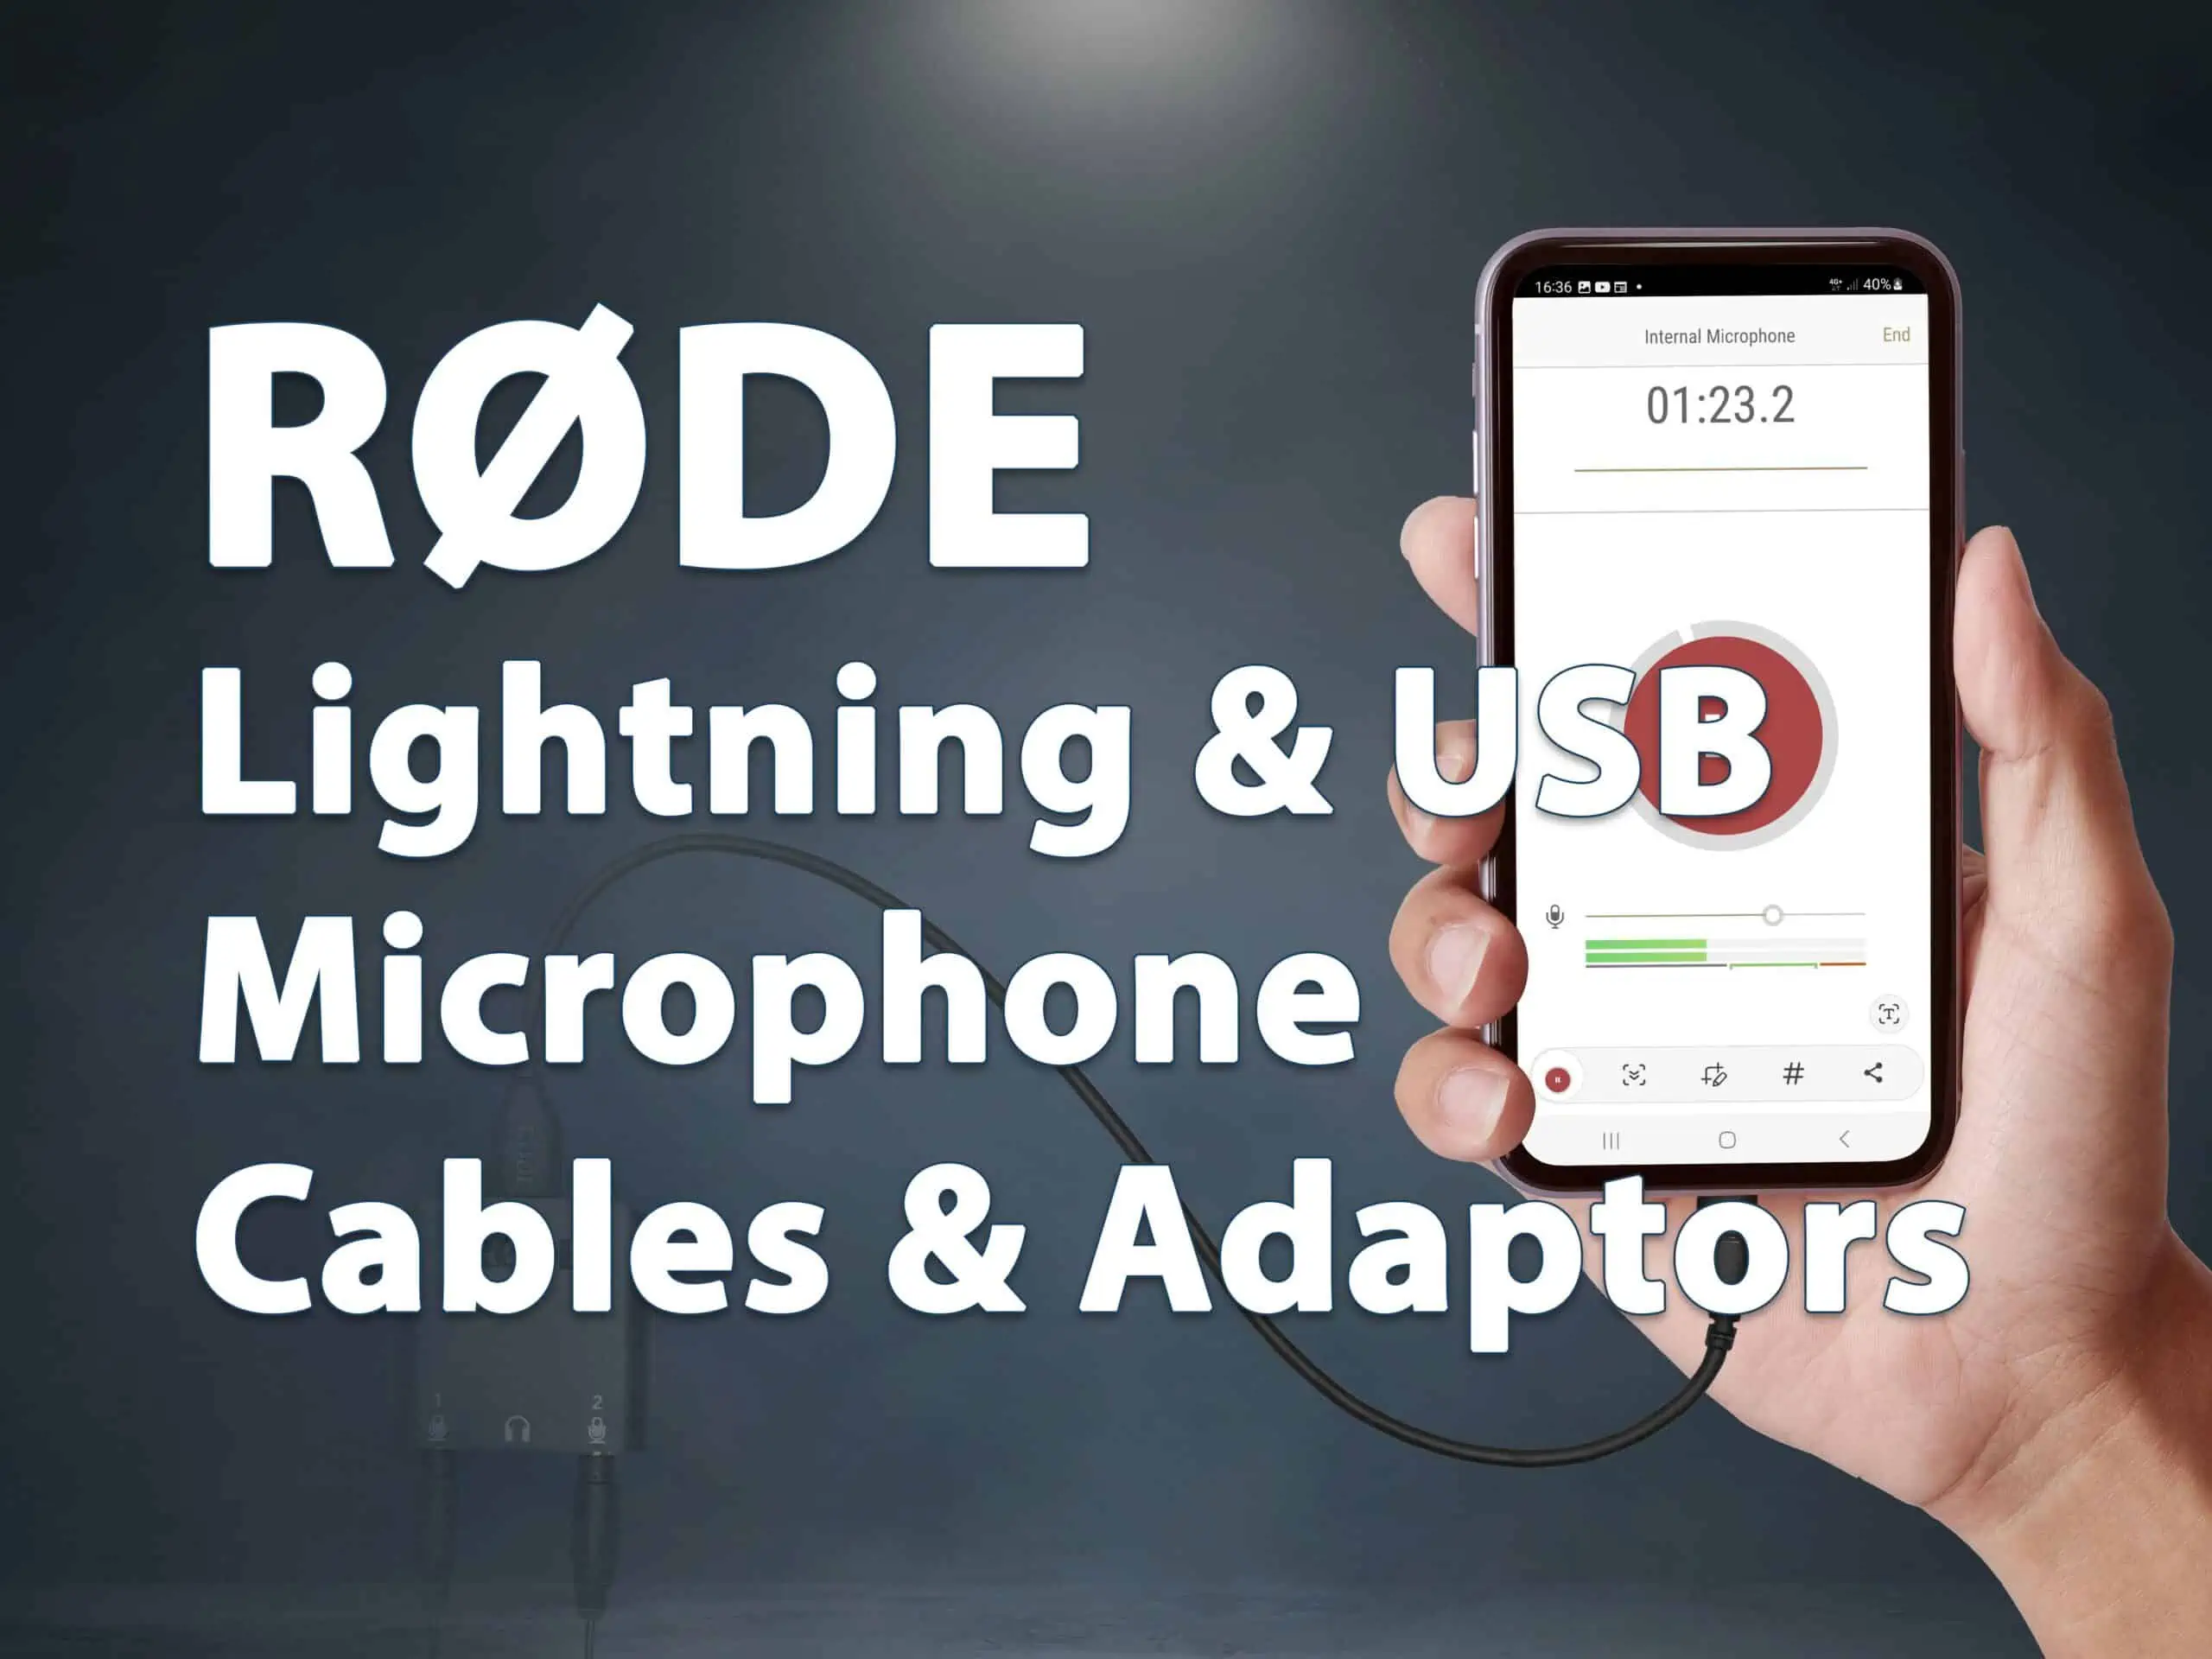 RØDE-Lightning-and-USB-Microphone-Cables-&-Adaptors-featured-Image